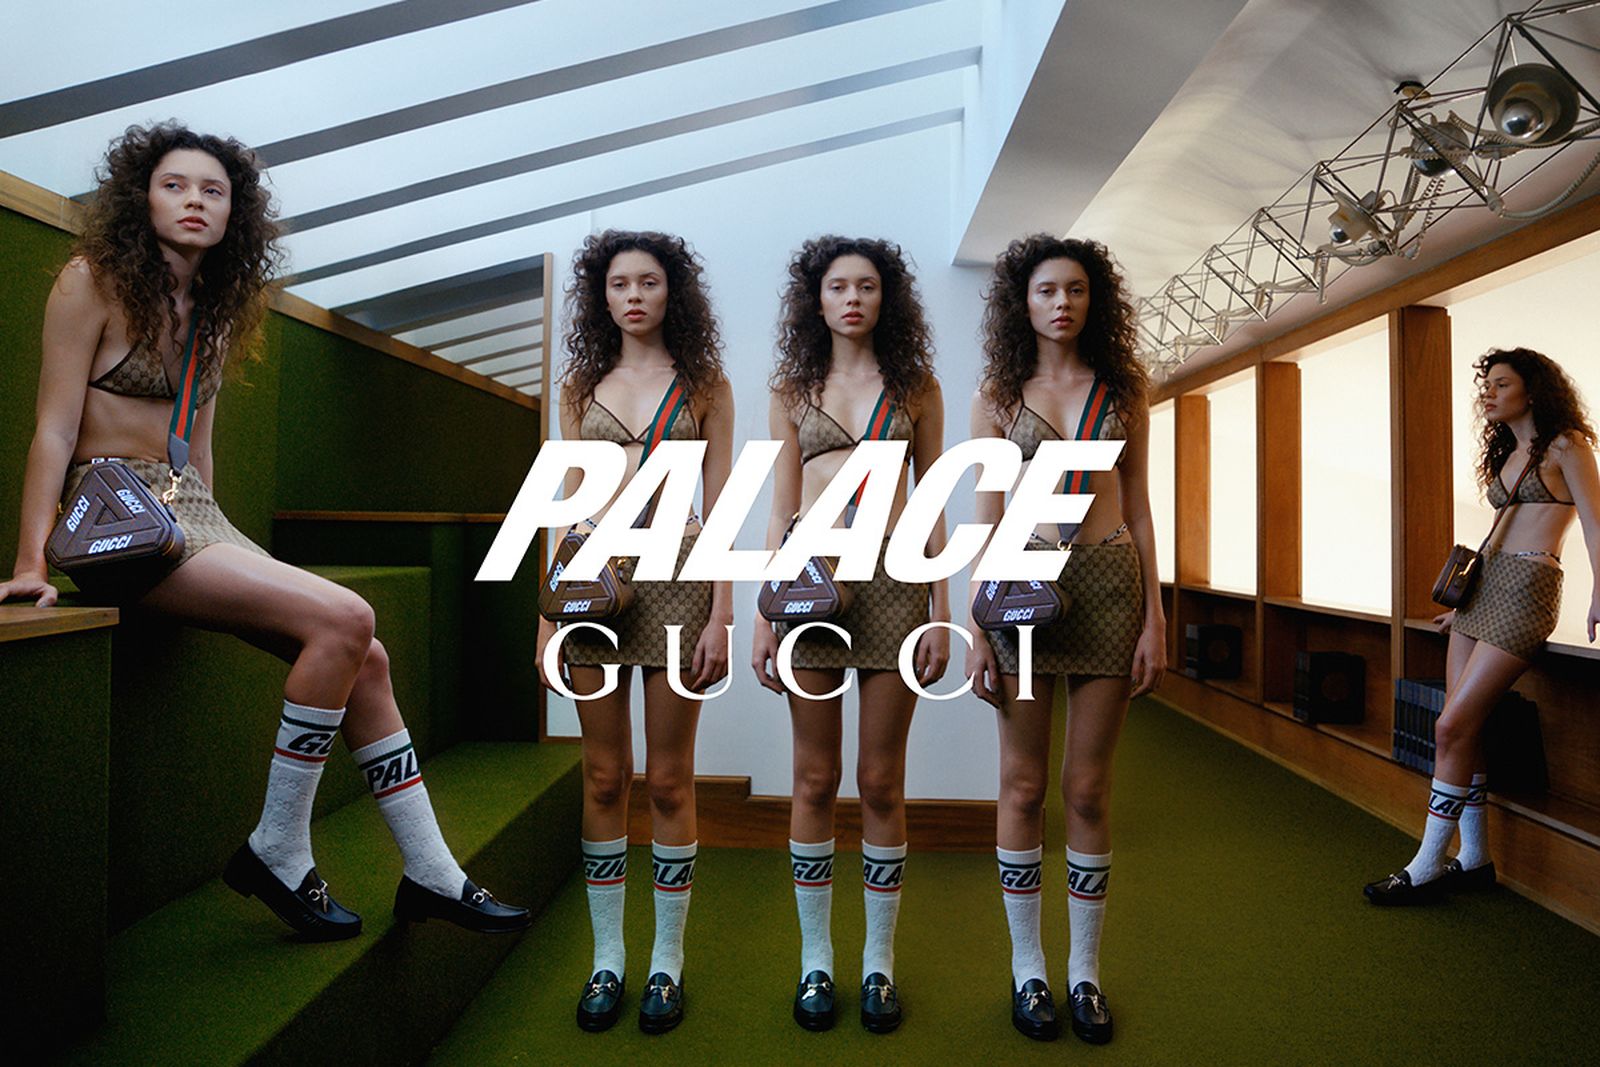 palace-skateboards-gucci-vault-stores-005